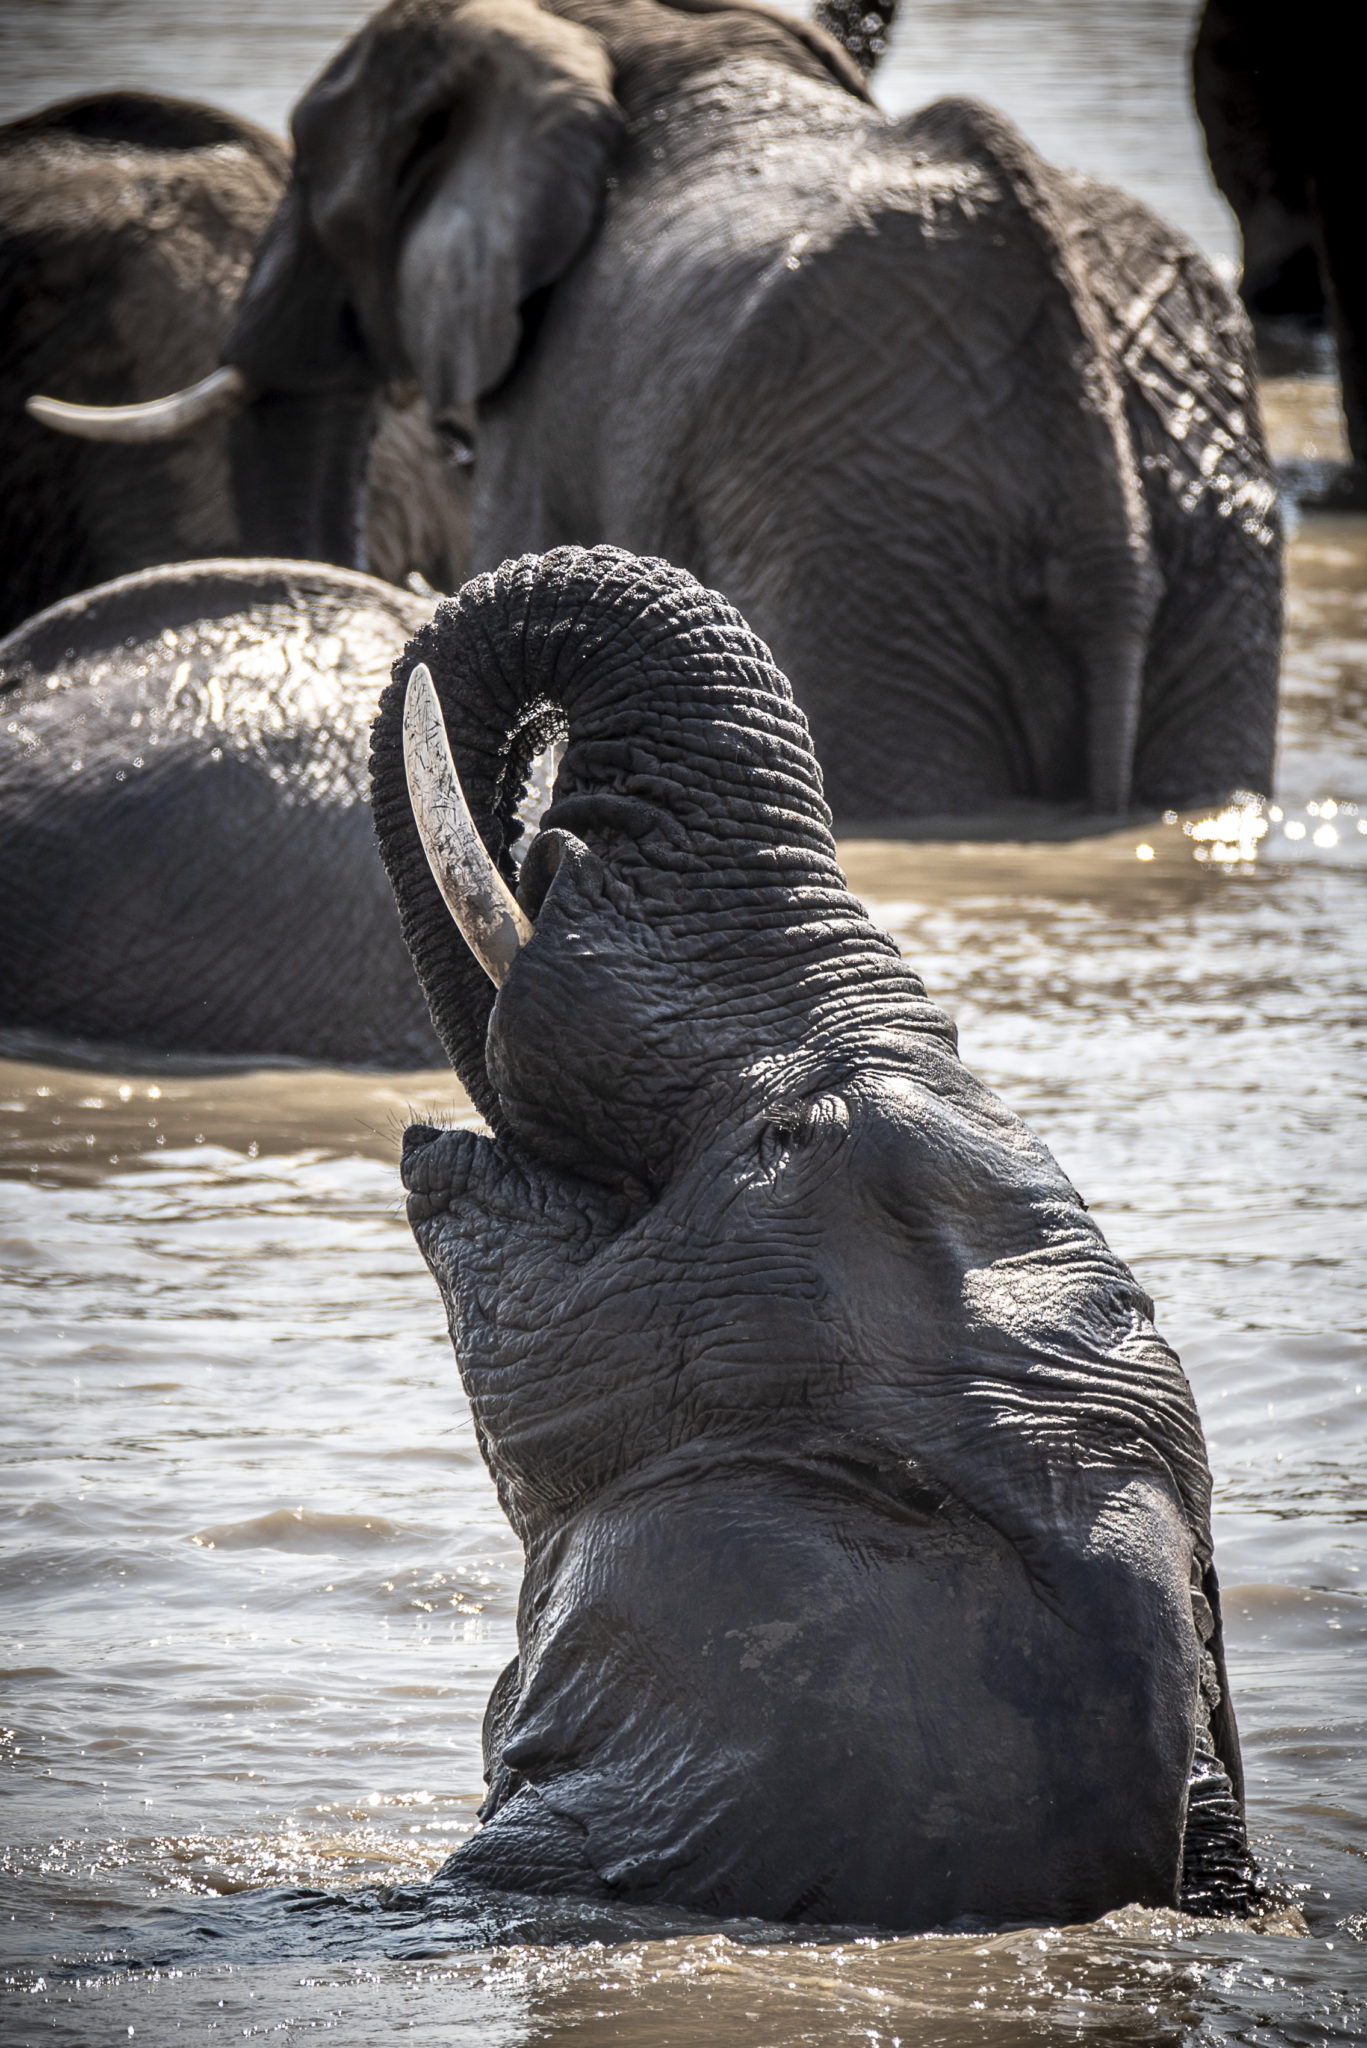 Play in the water – South Africa